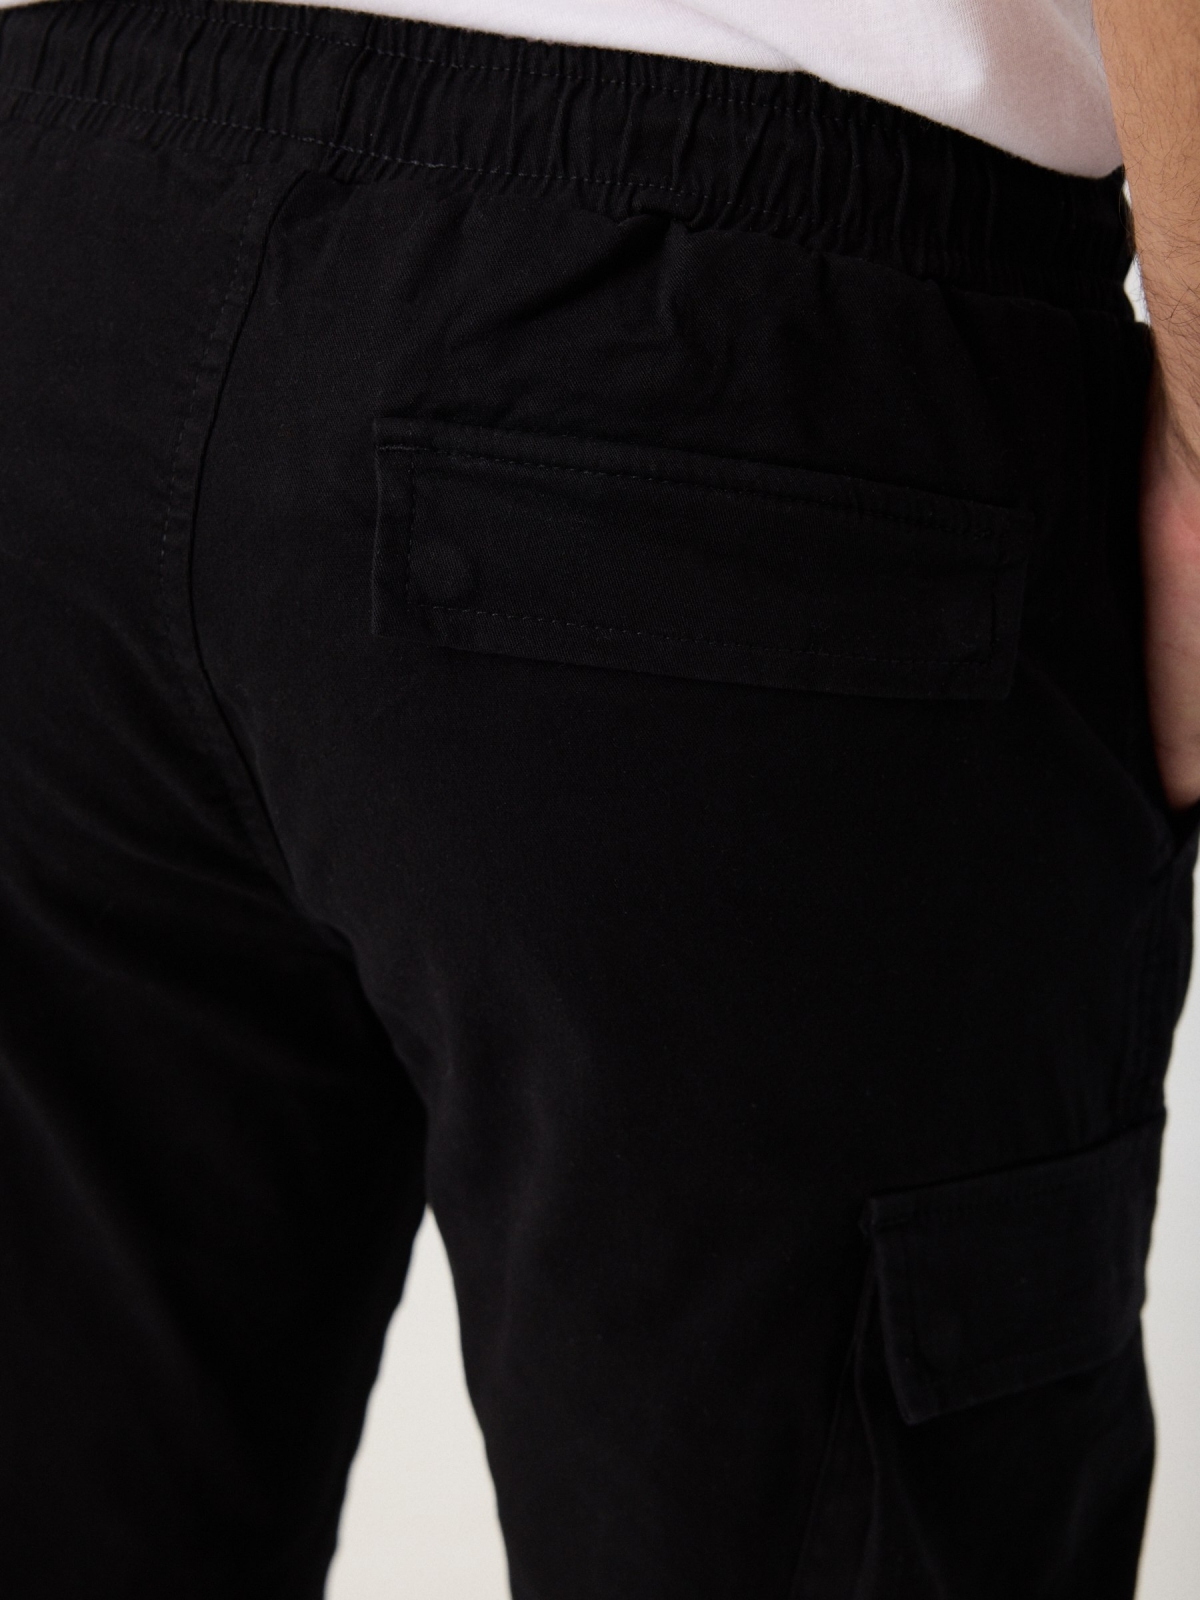 Adjustable cargo joggers black detail view